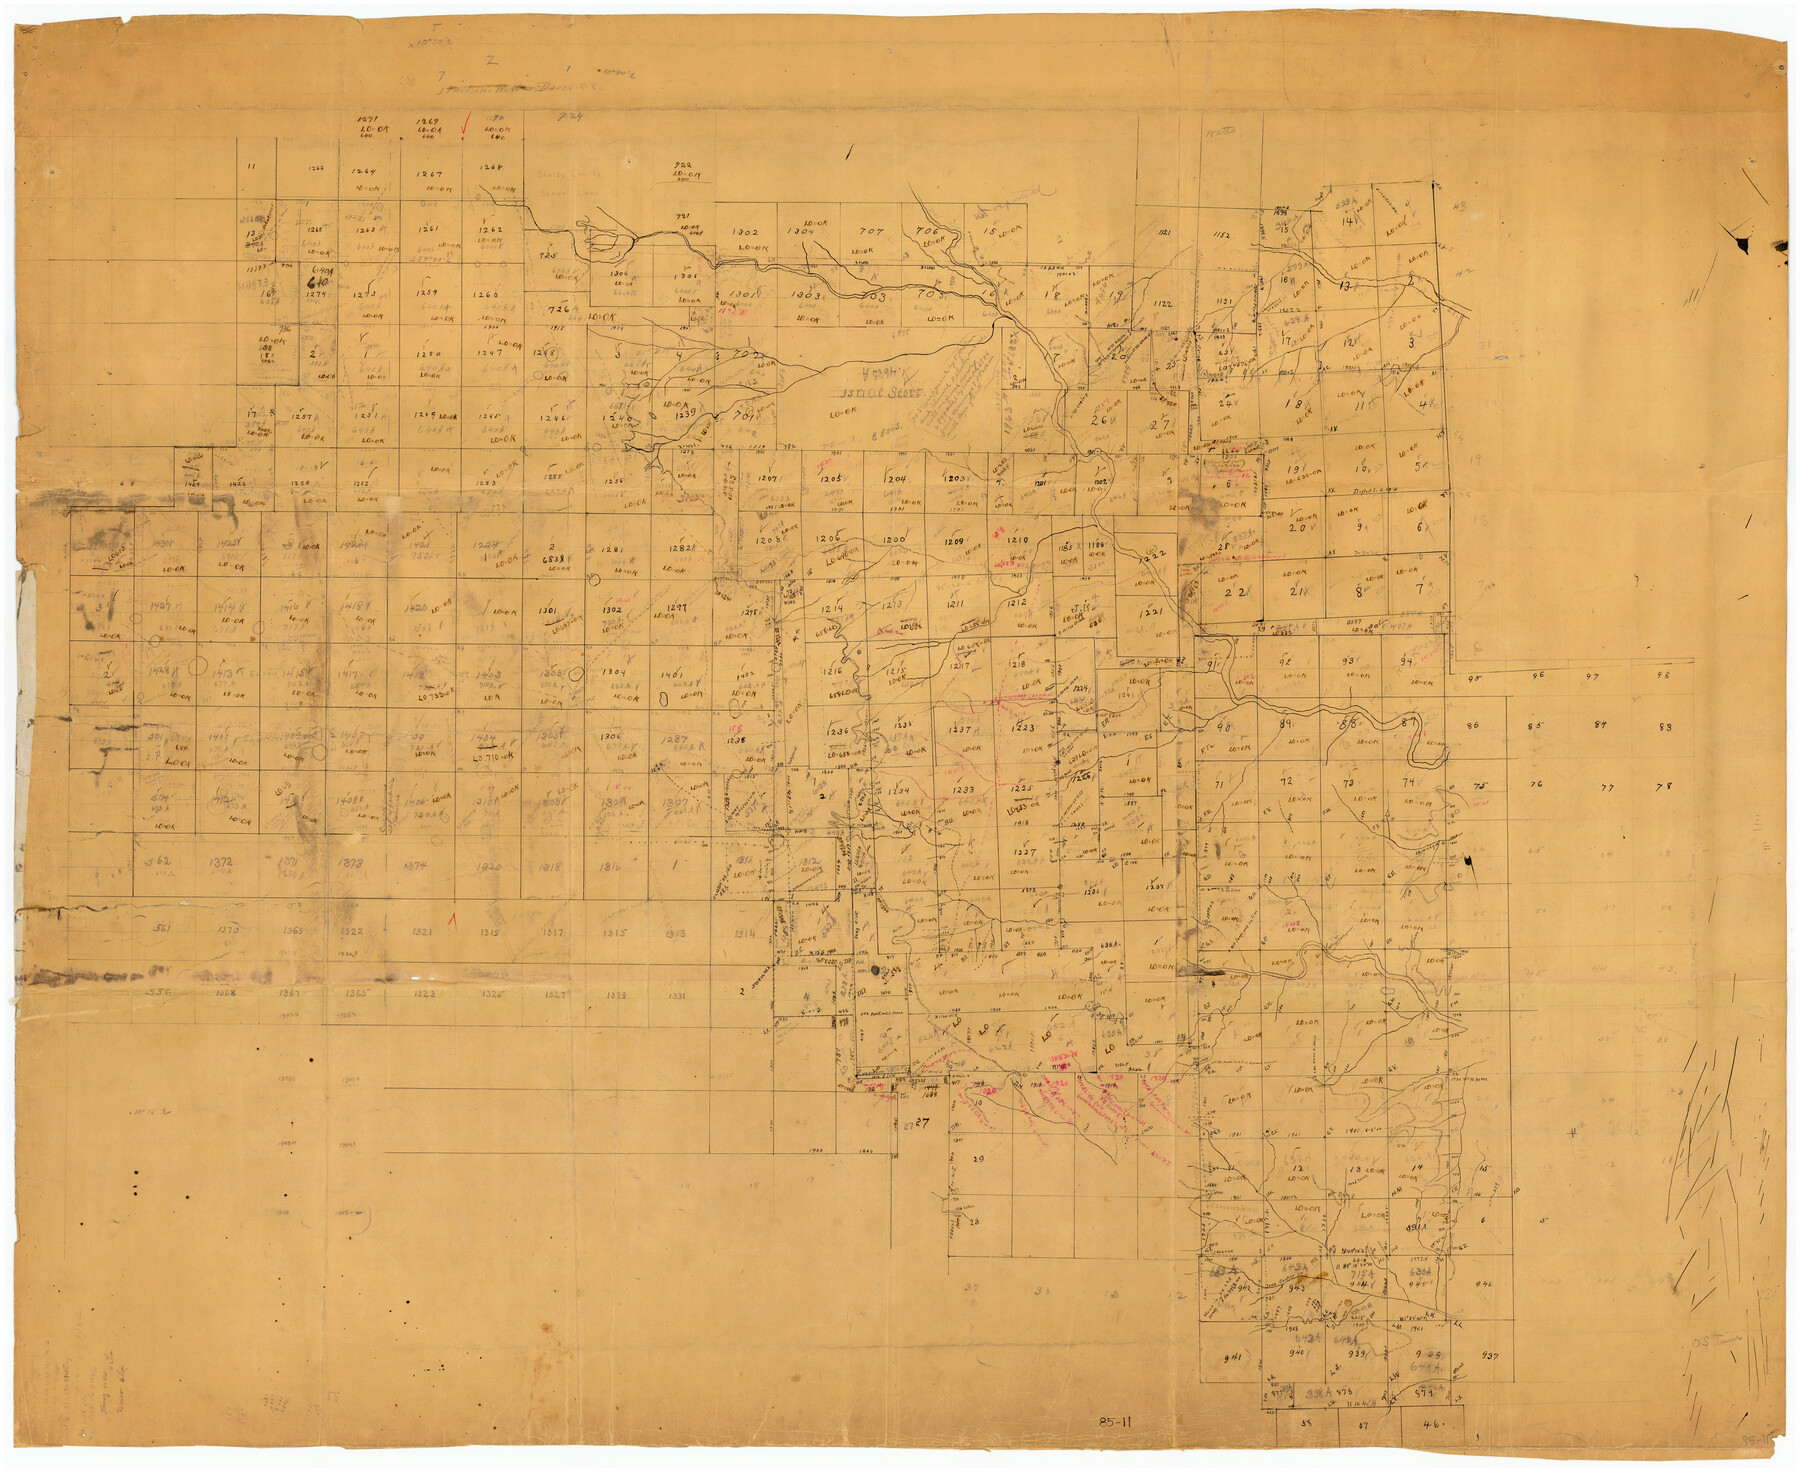 89950, [Sketch showing Blocks 1, B18 and E.L. & RR. Co. Blocks 2, 8 and 97], Twichell Survey Records